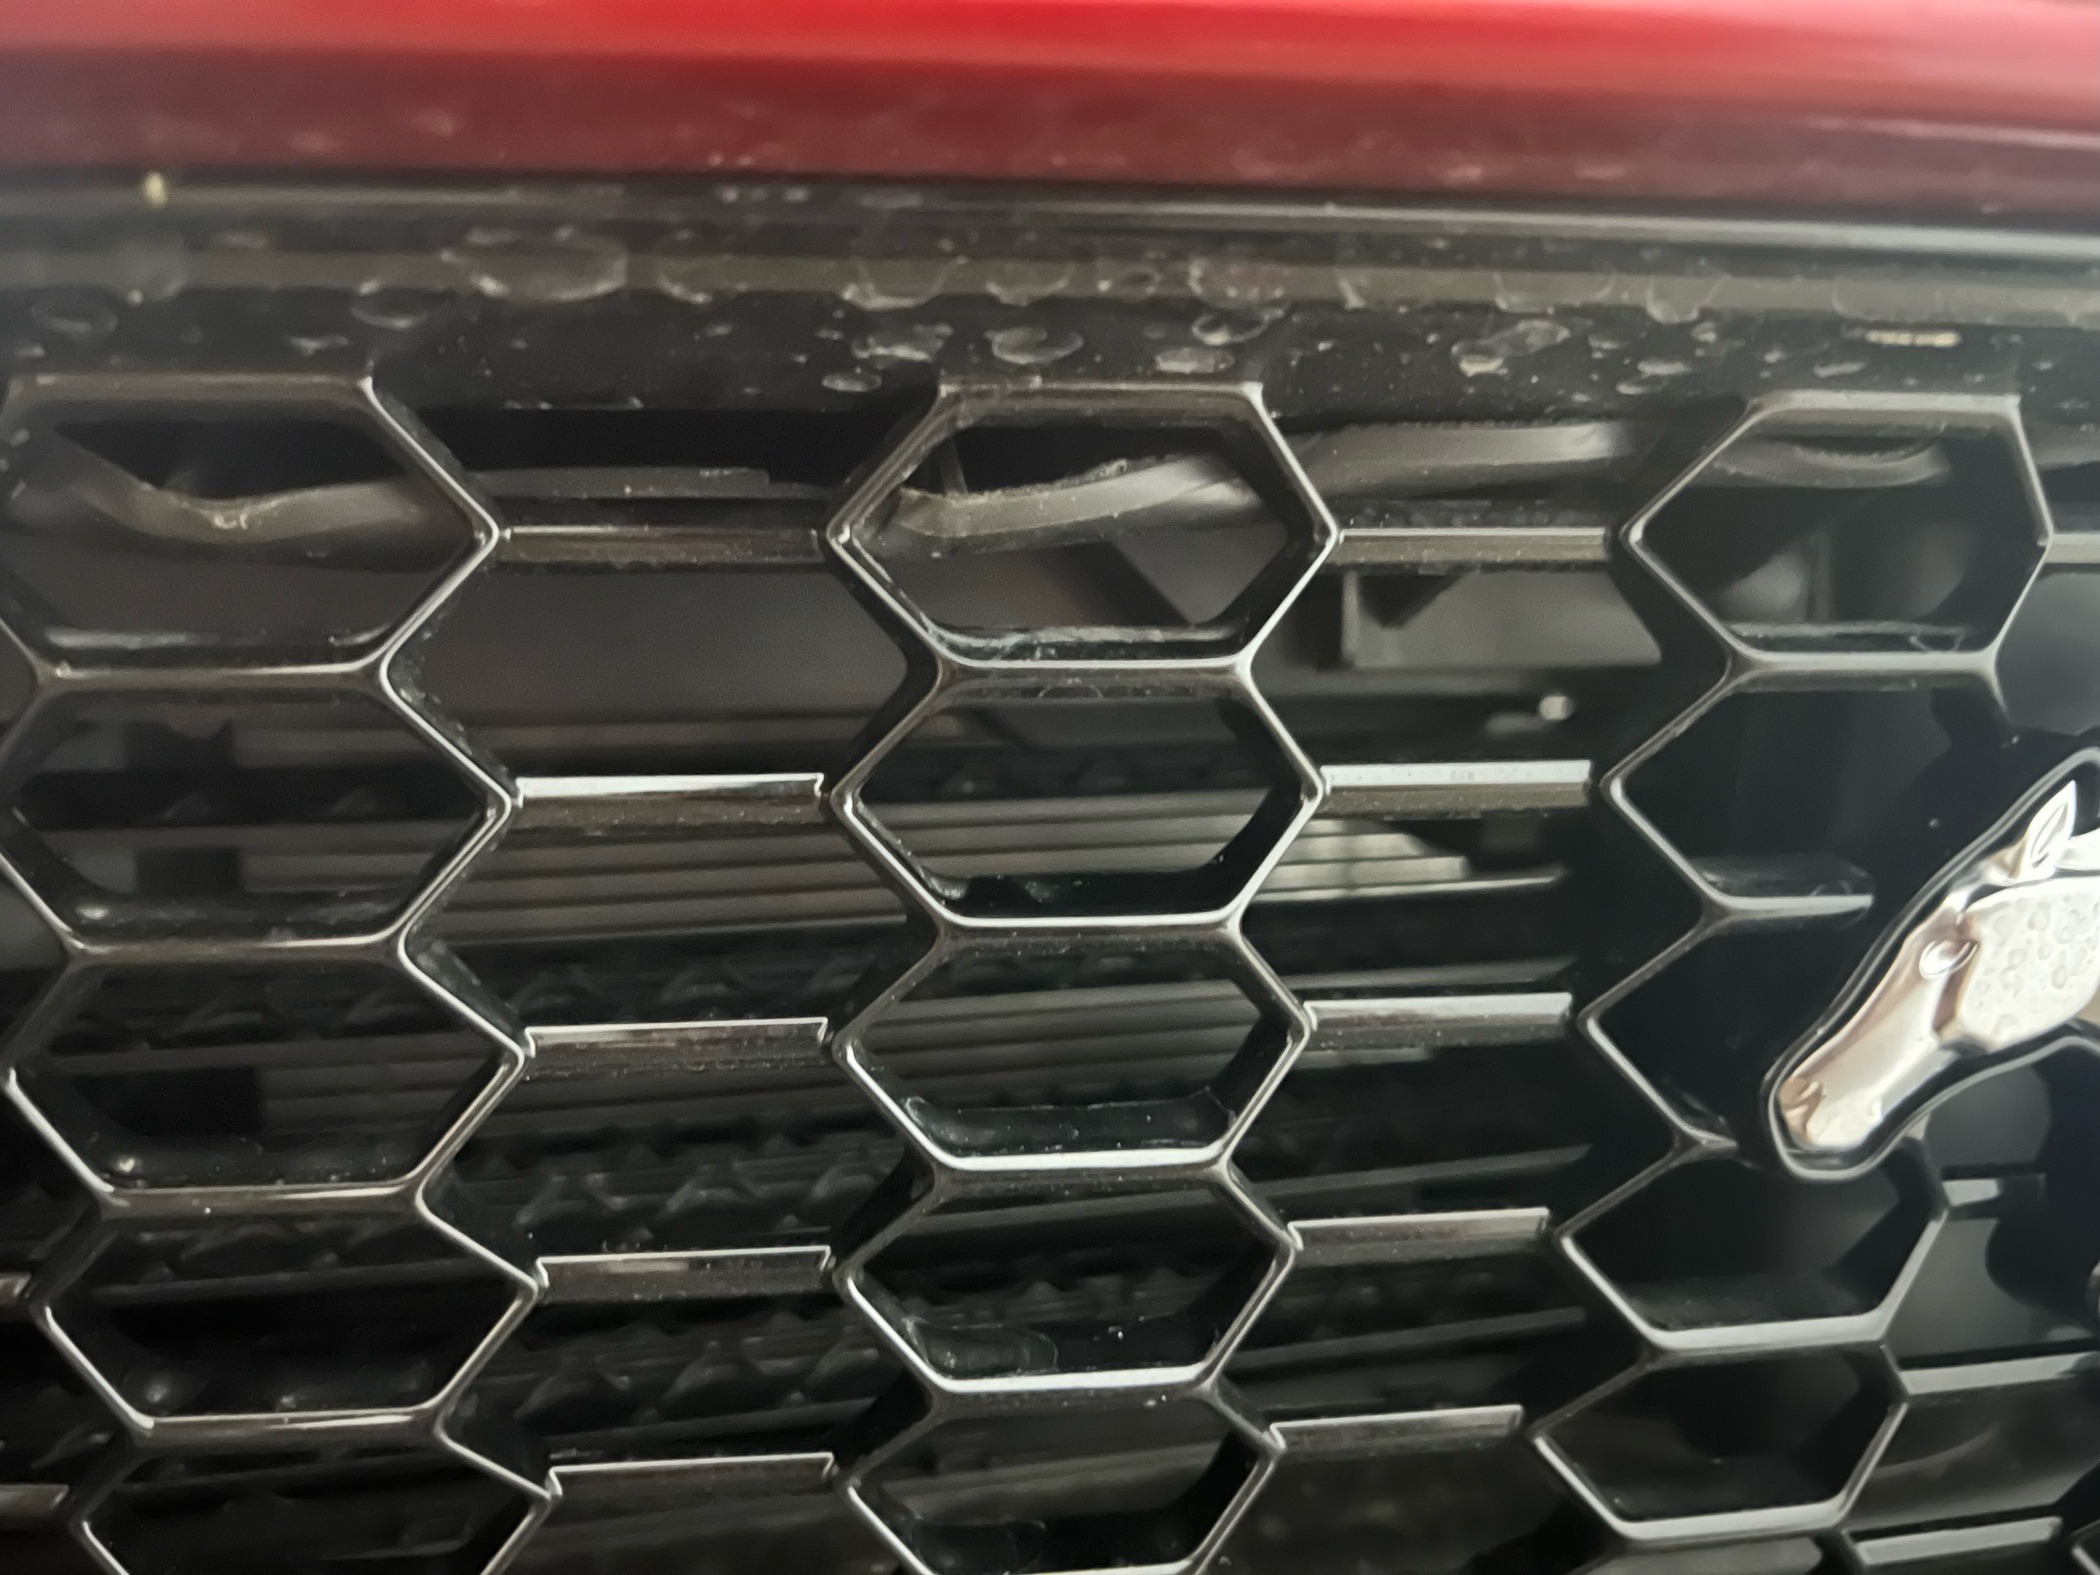 S650 Mustang Rubber piece hanging down behind grille image1 (1)